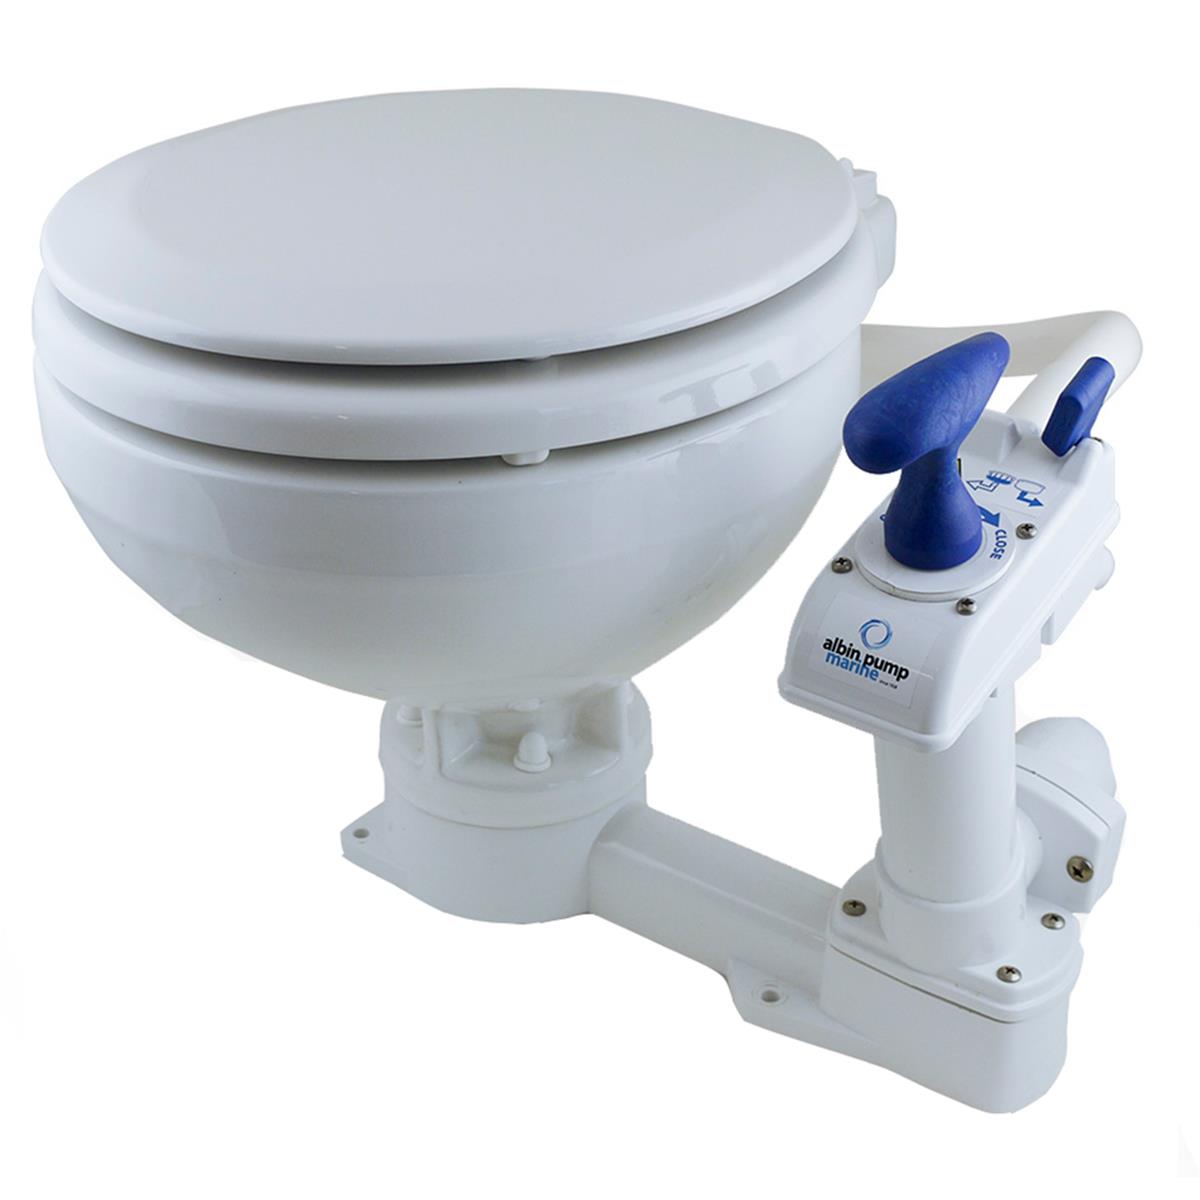 Picture of Albin Pump Marine 07-01-001 Toilet Manual Compact